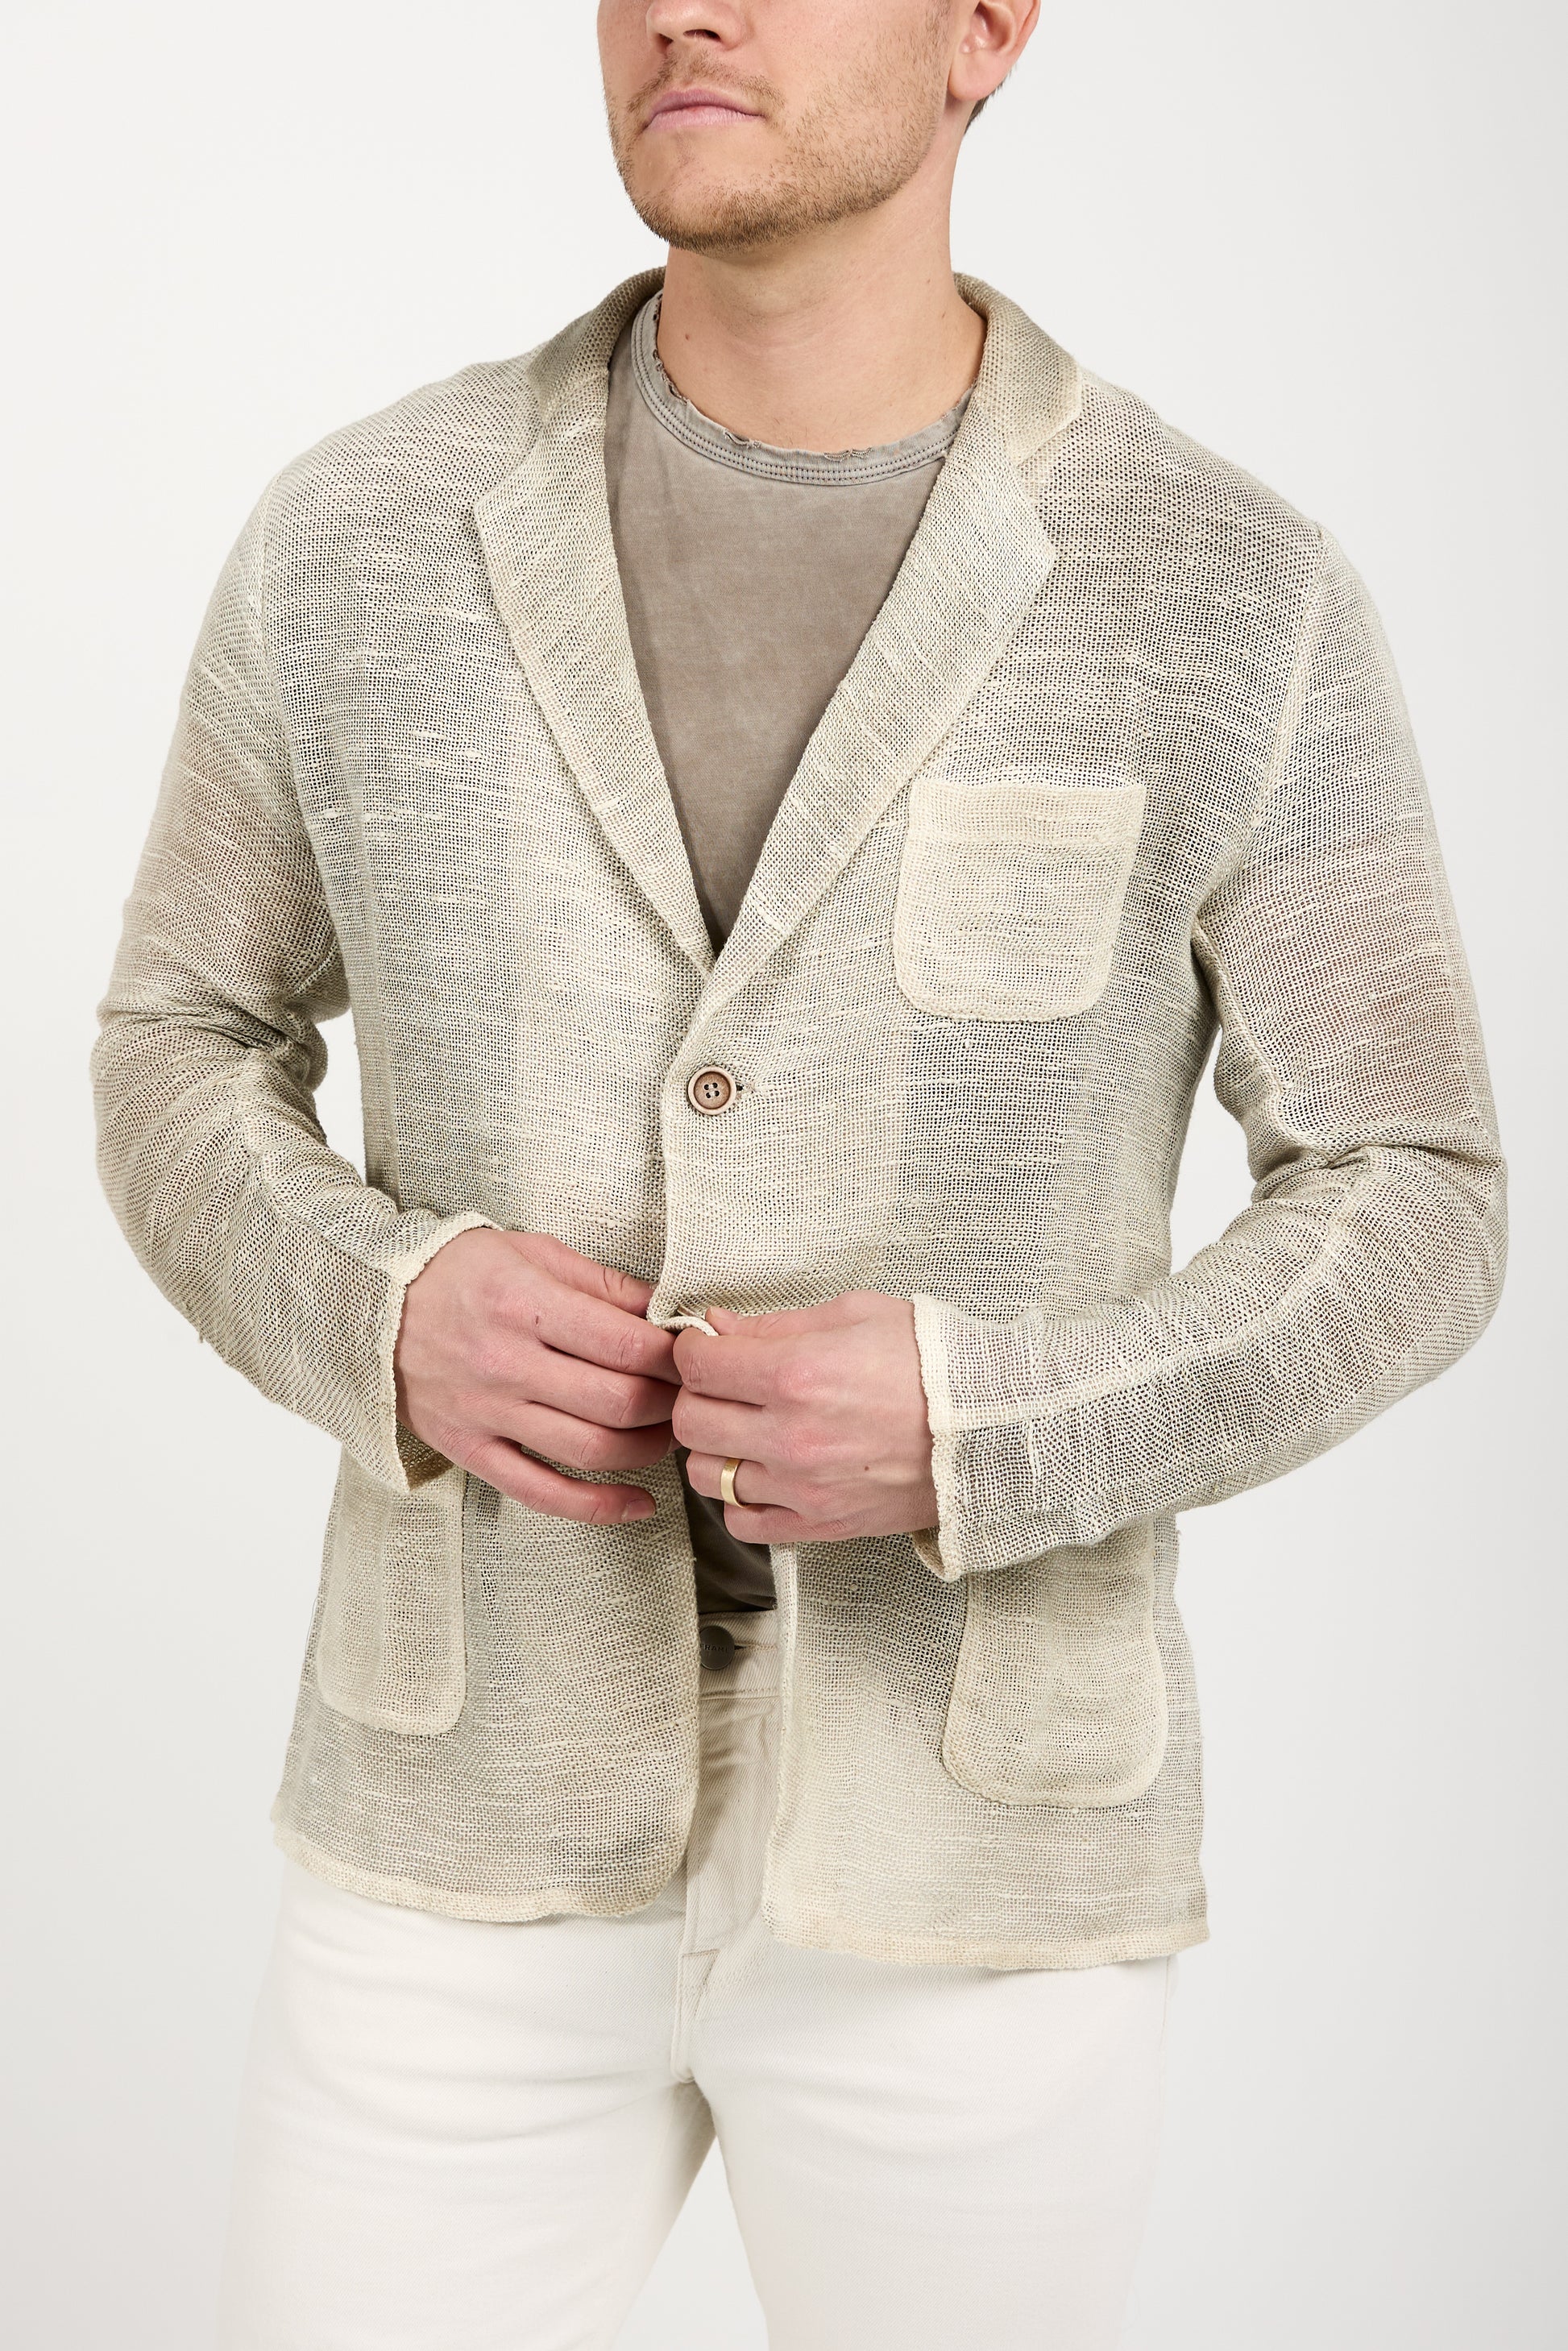 AVANT TOI Hand-Painted Net Fabric Blazer Jacket in Taupe